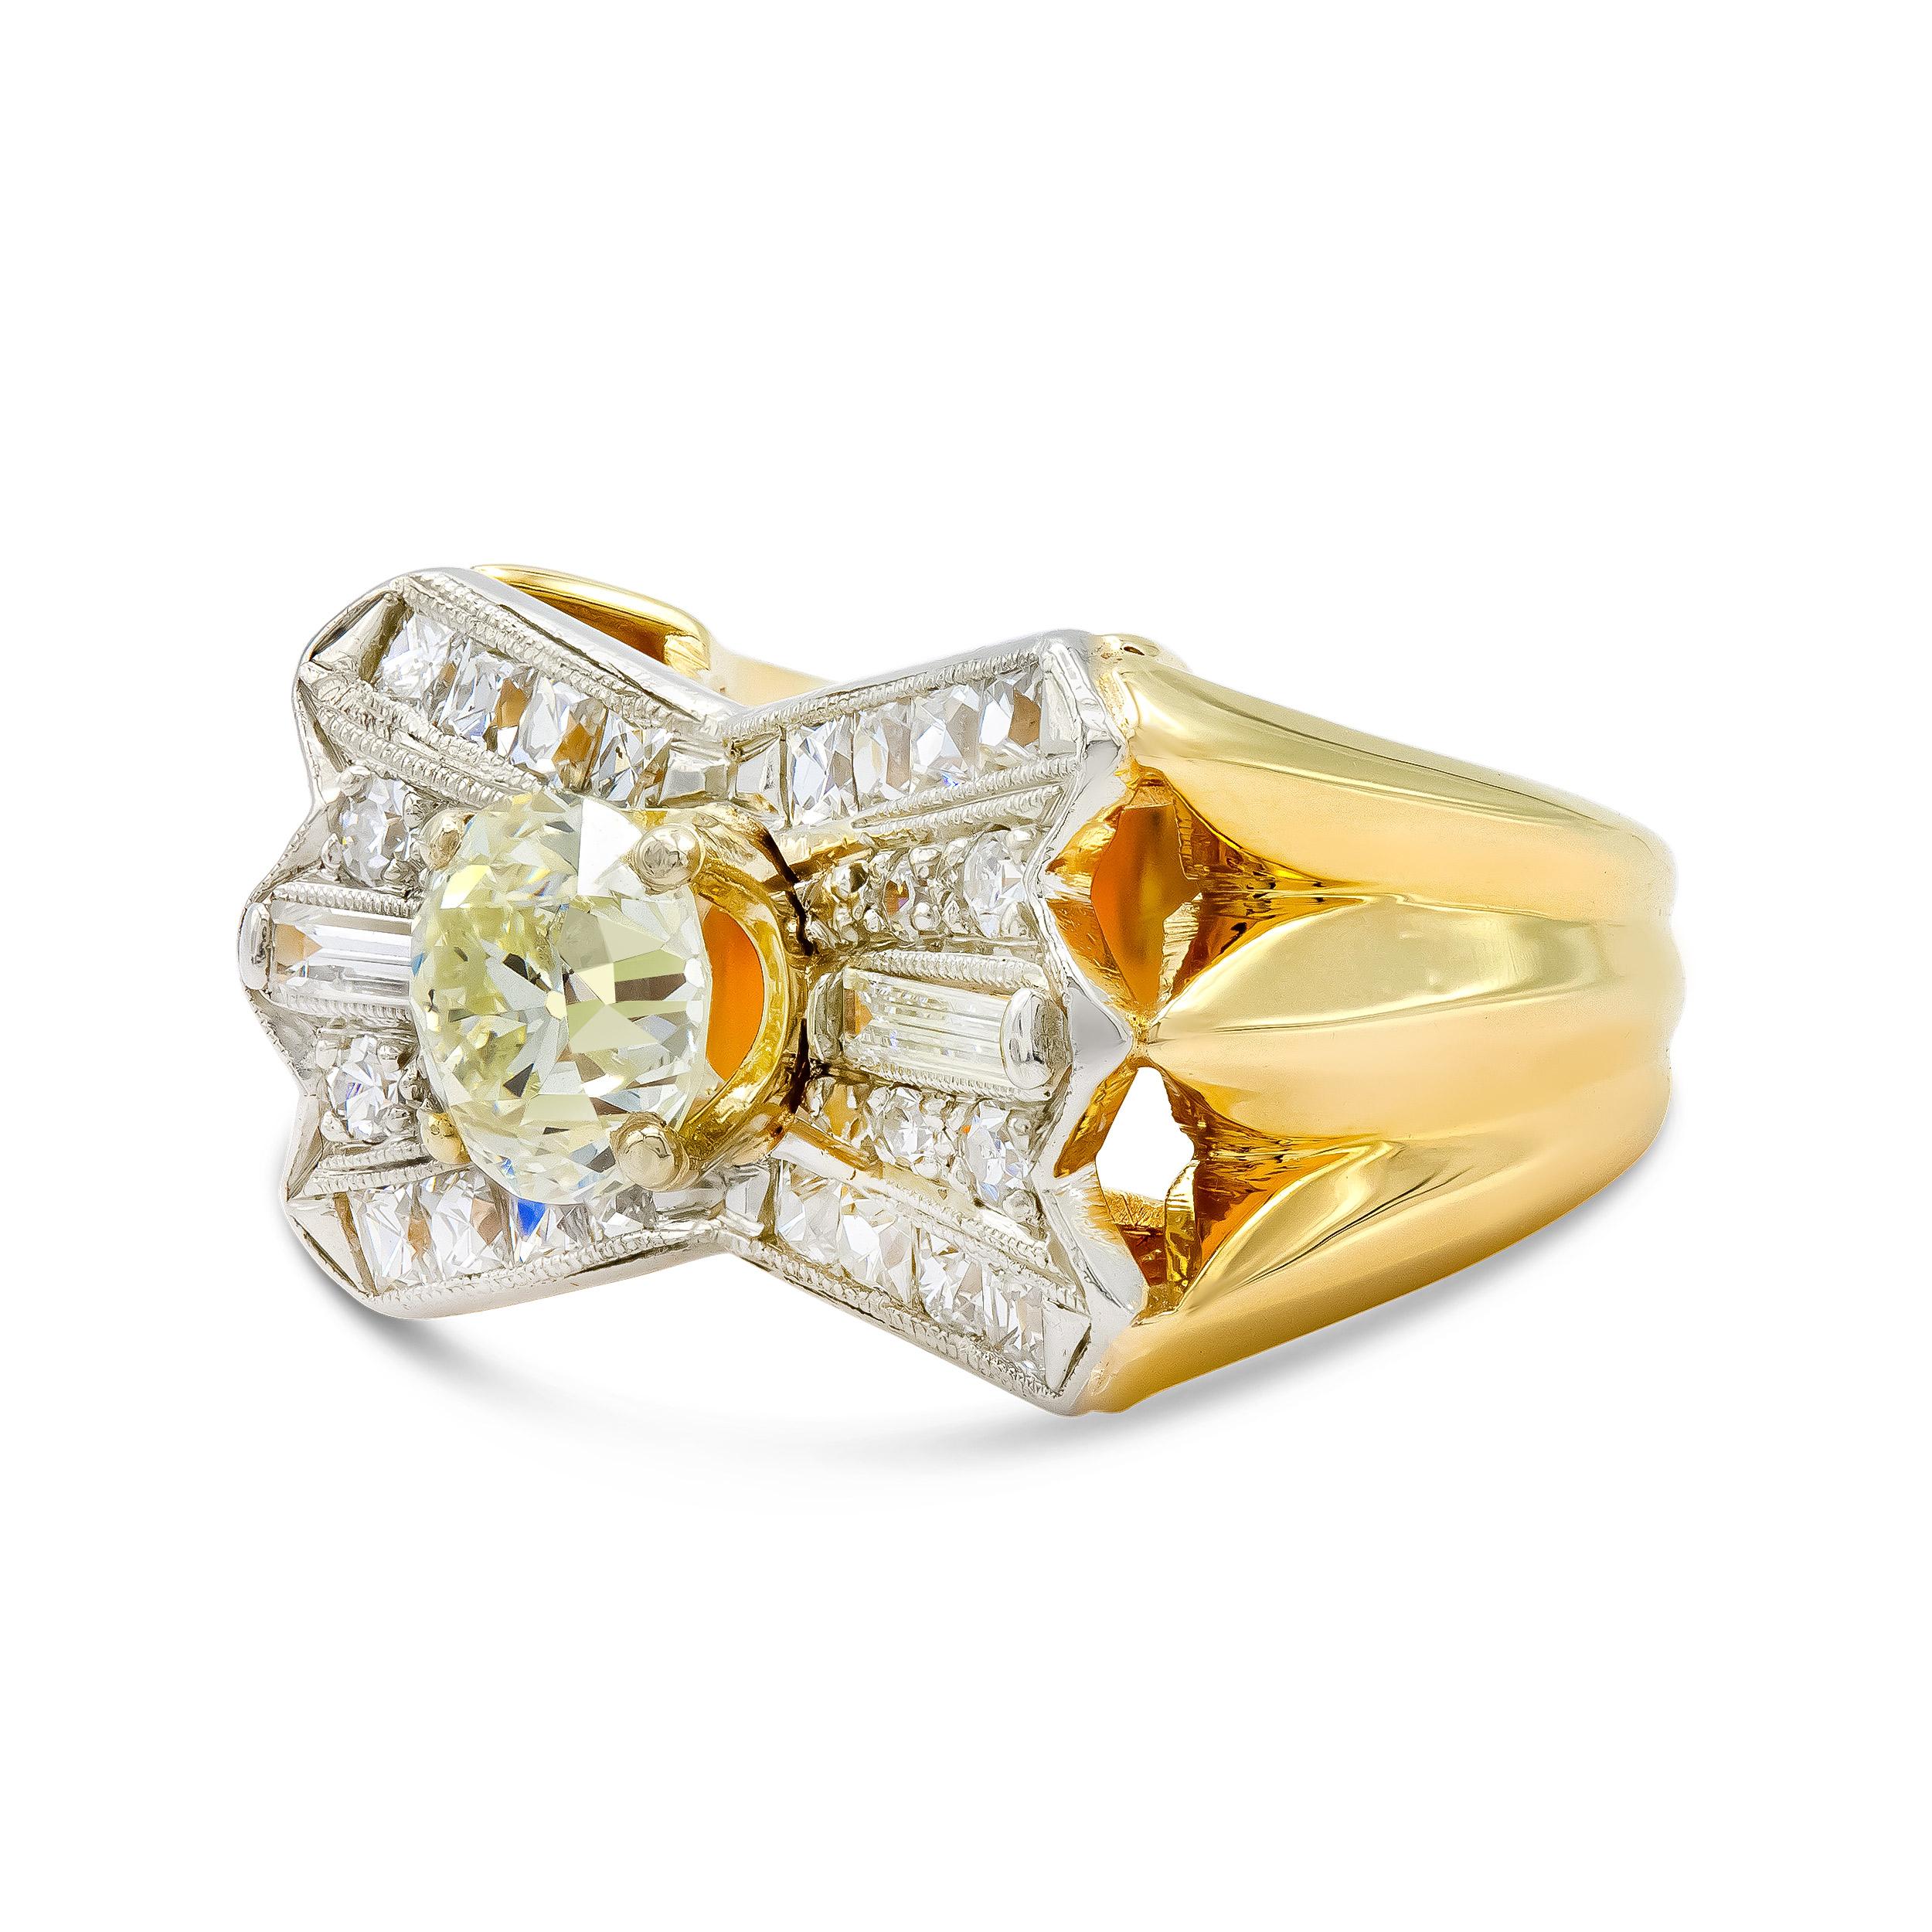 Old European Cut Revive Vintage 1.95 Ct. Diamond Two-Tone Ring O-P SI2 in 14k Gold For Sale